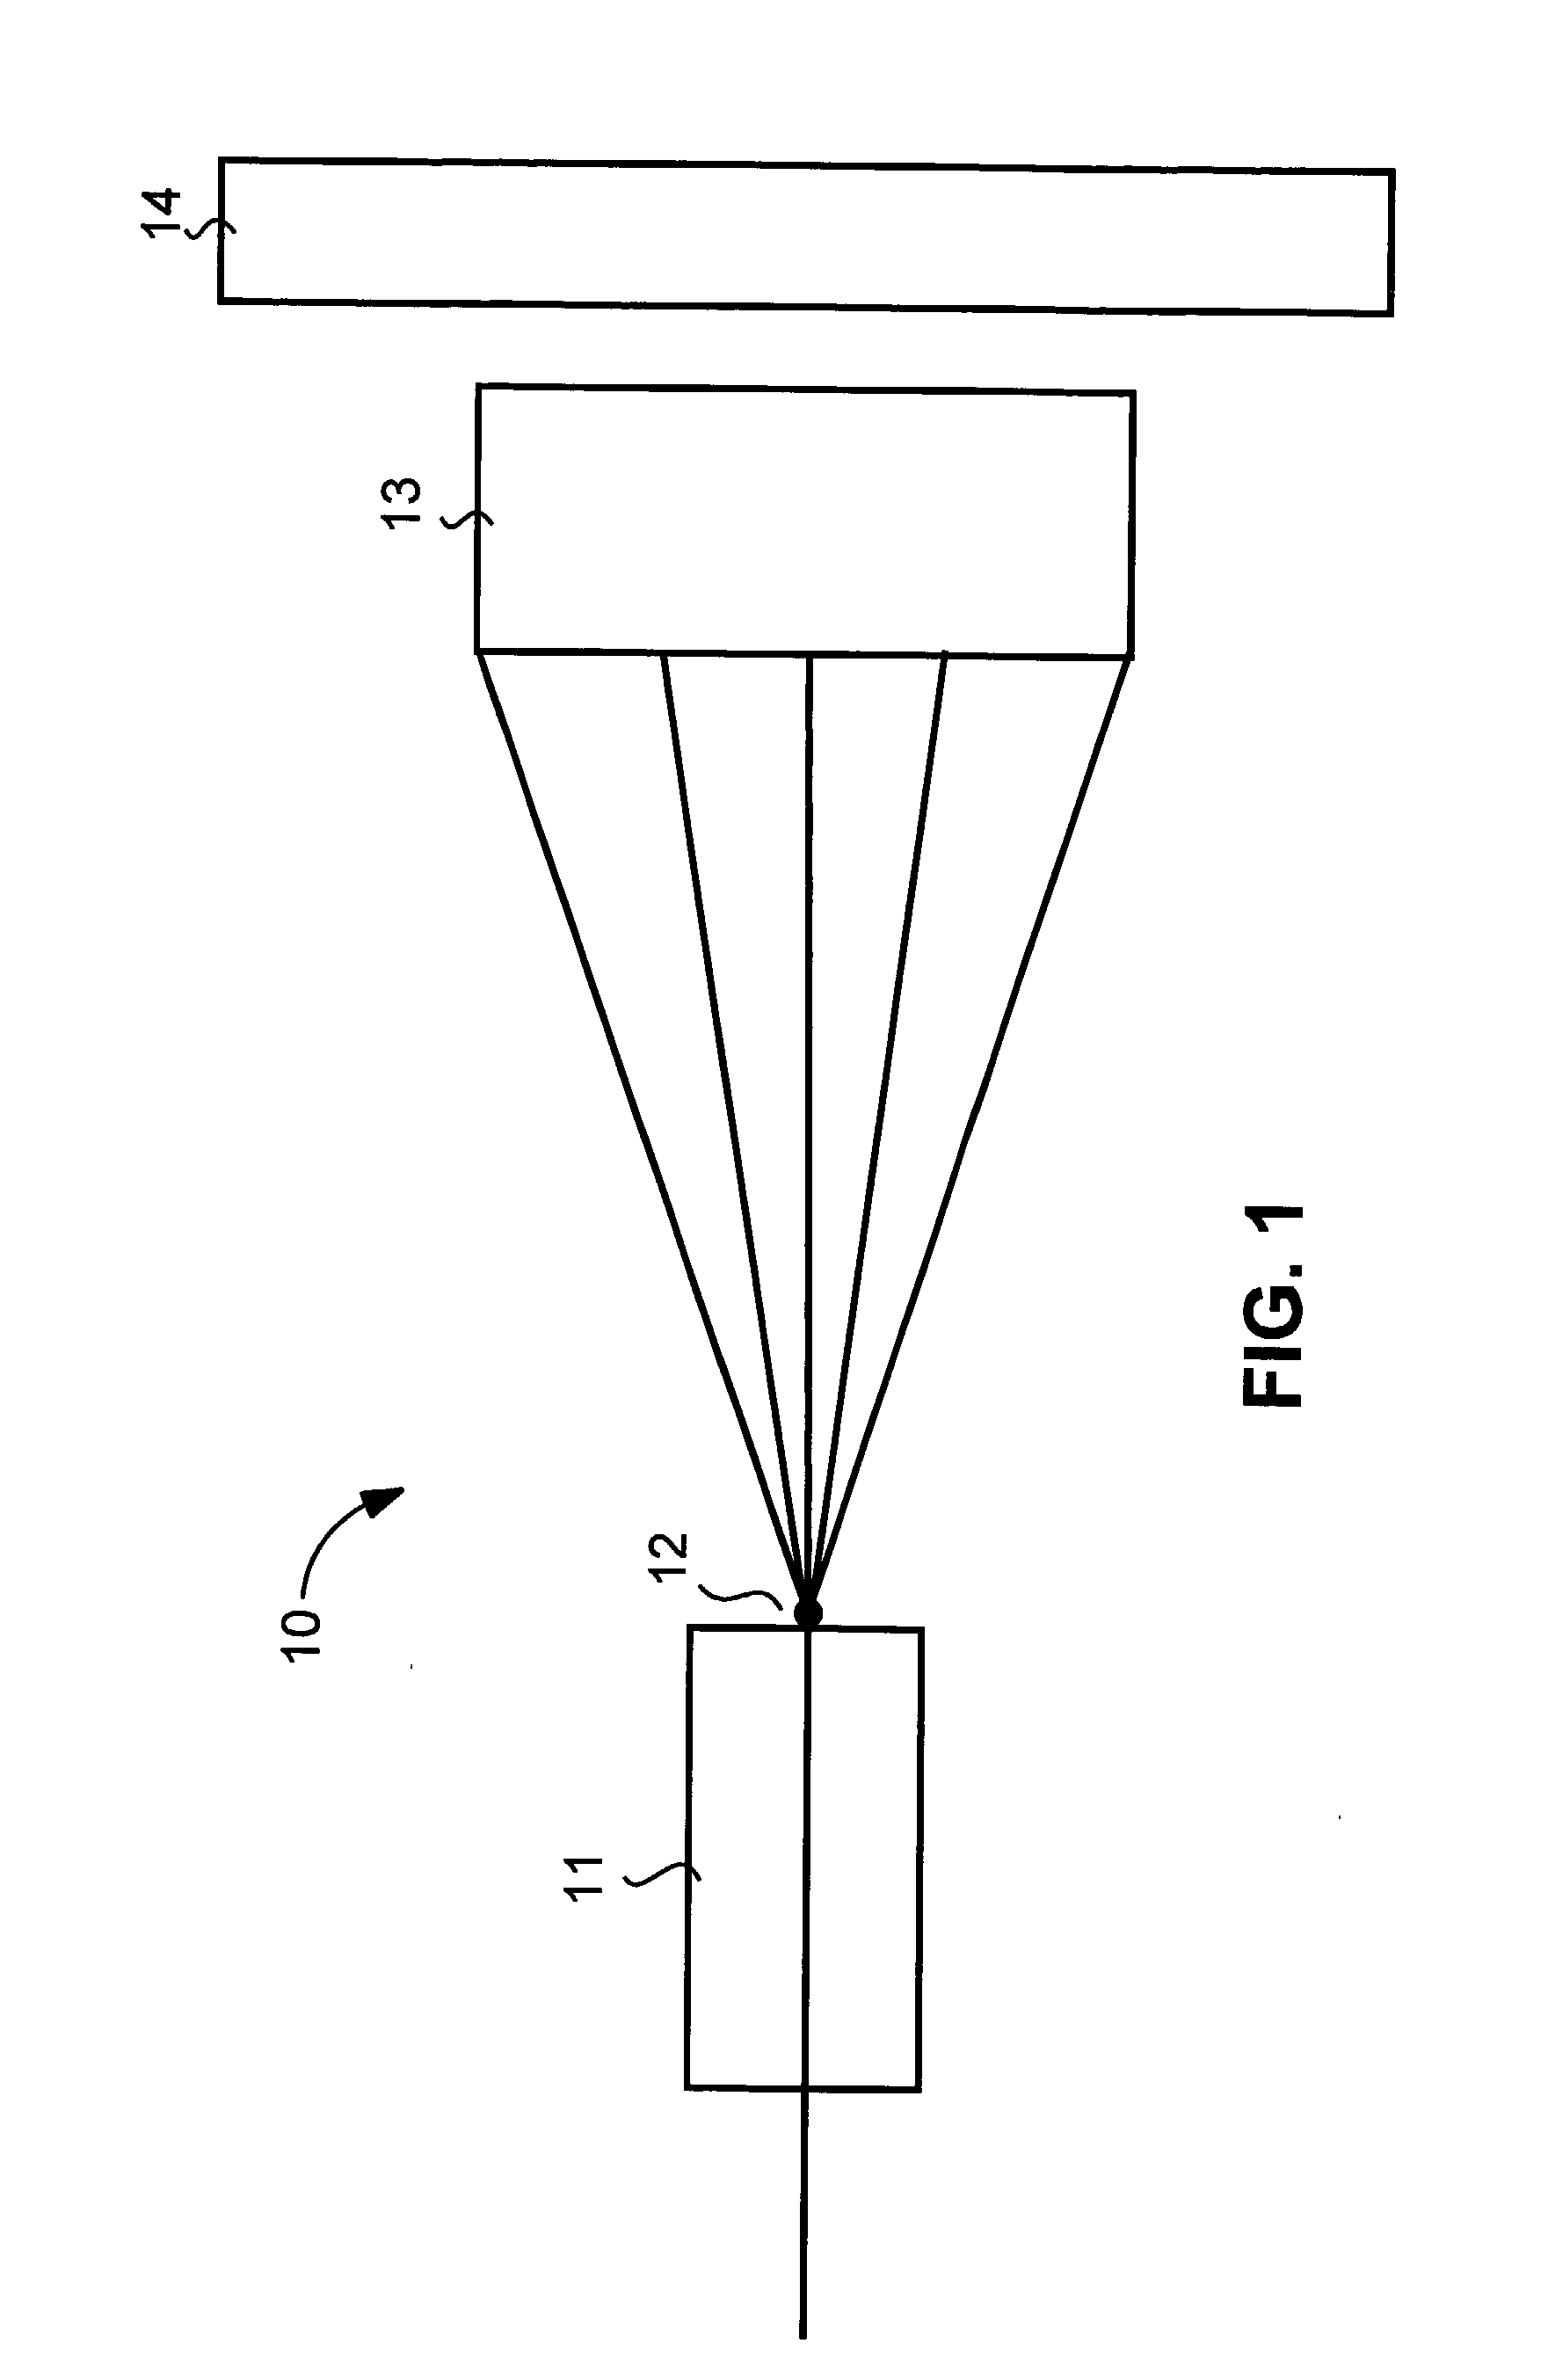 Multi-Energy Cargo Inspection System Based on an  Electron Accelerator